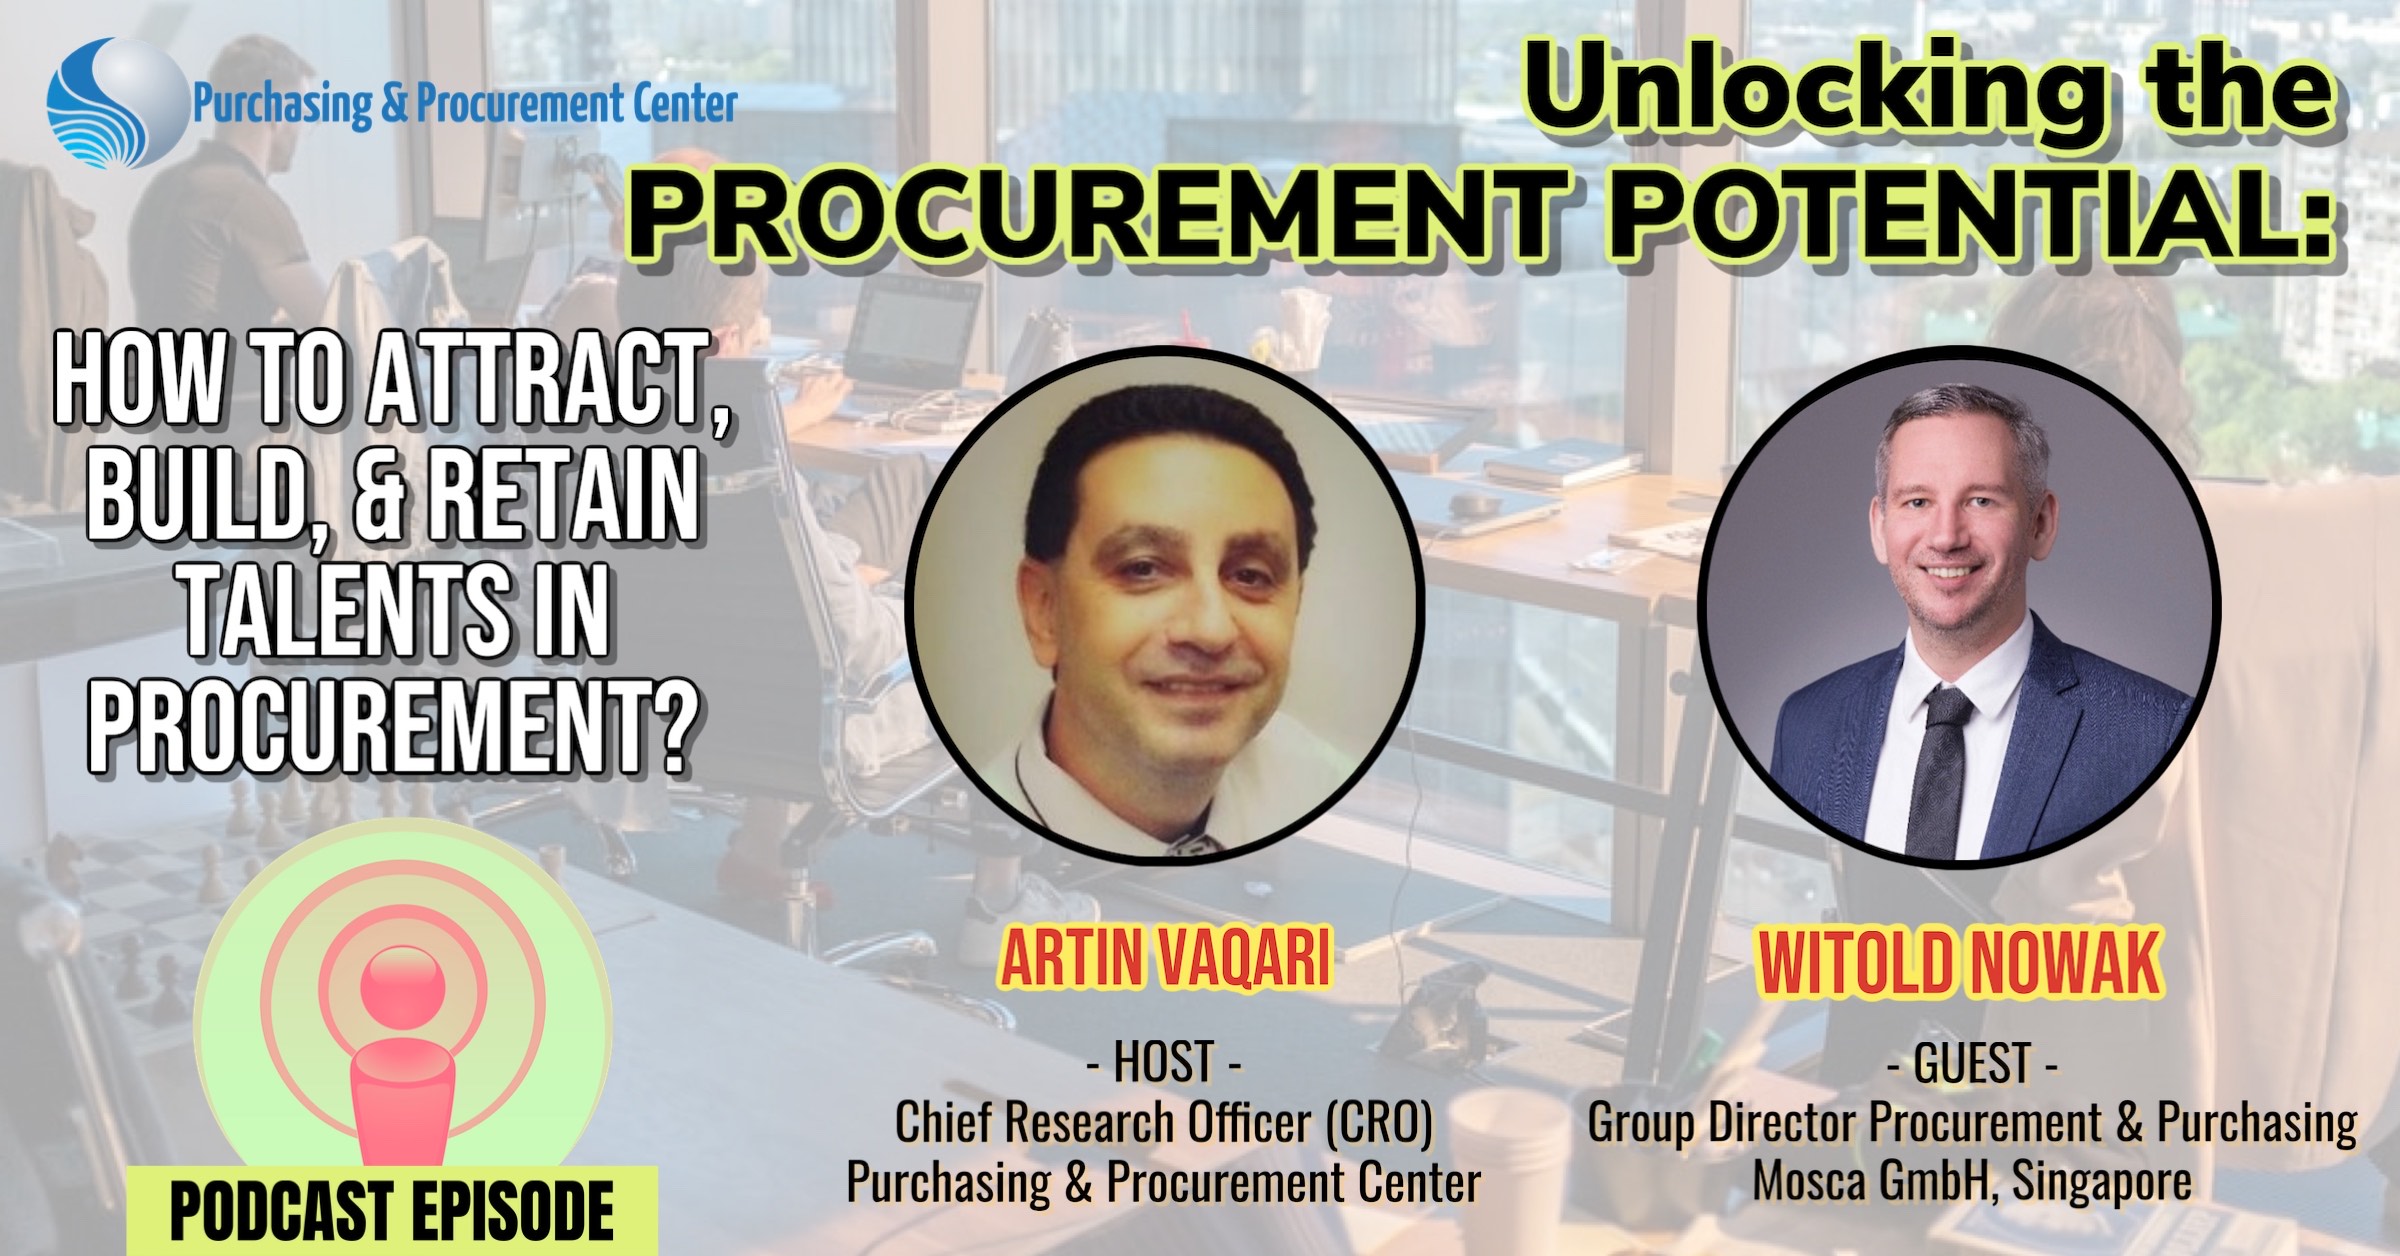 How to Overcome Lack of Perspective in Procurement when Aligning KPIs with Business Objectives! What Should You Look for When Hiring in Procurement & Much More!